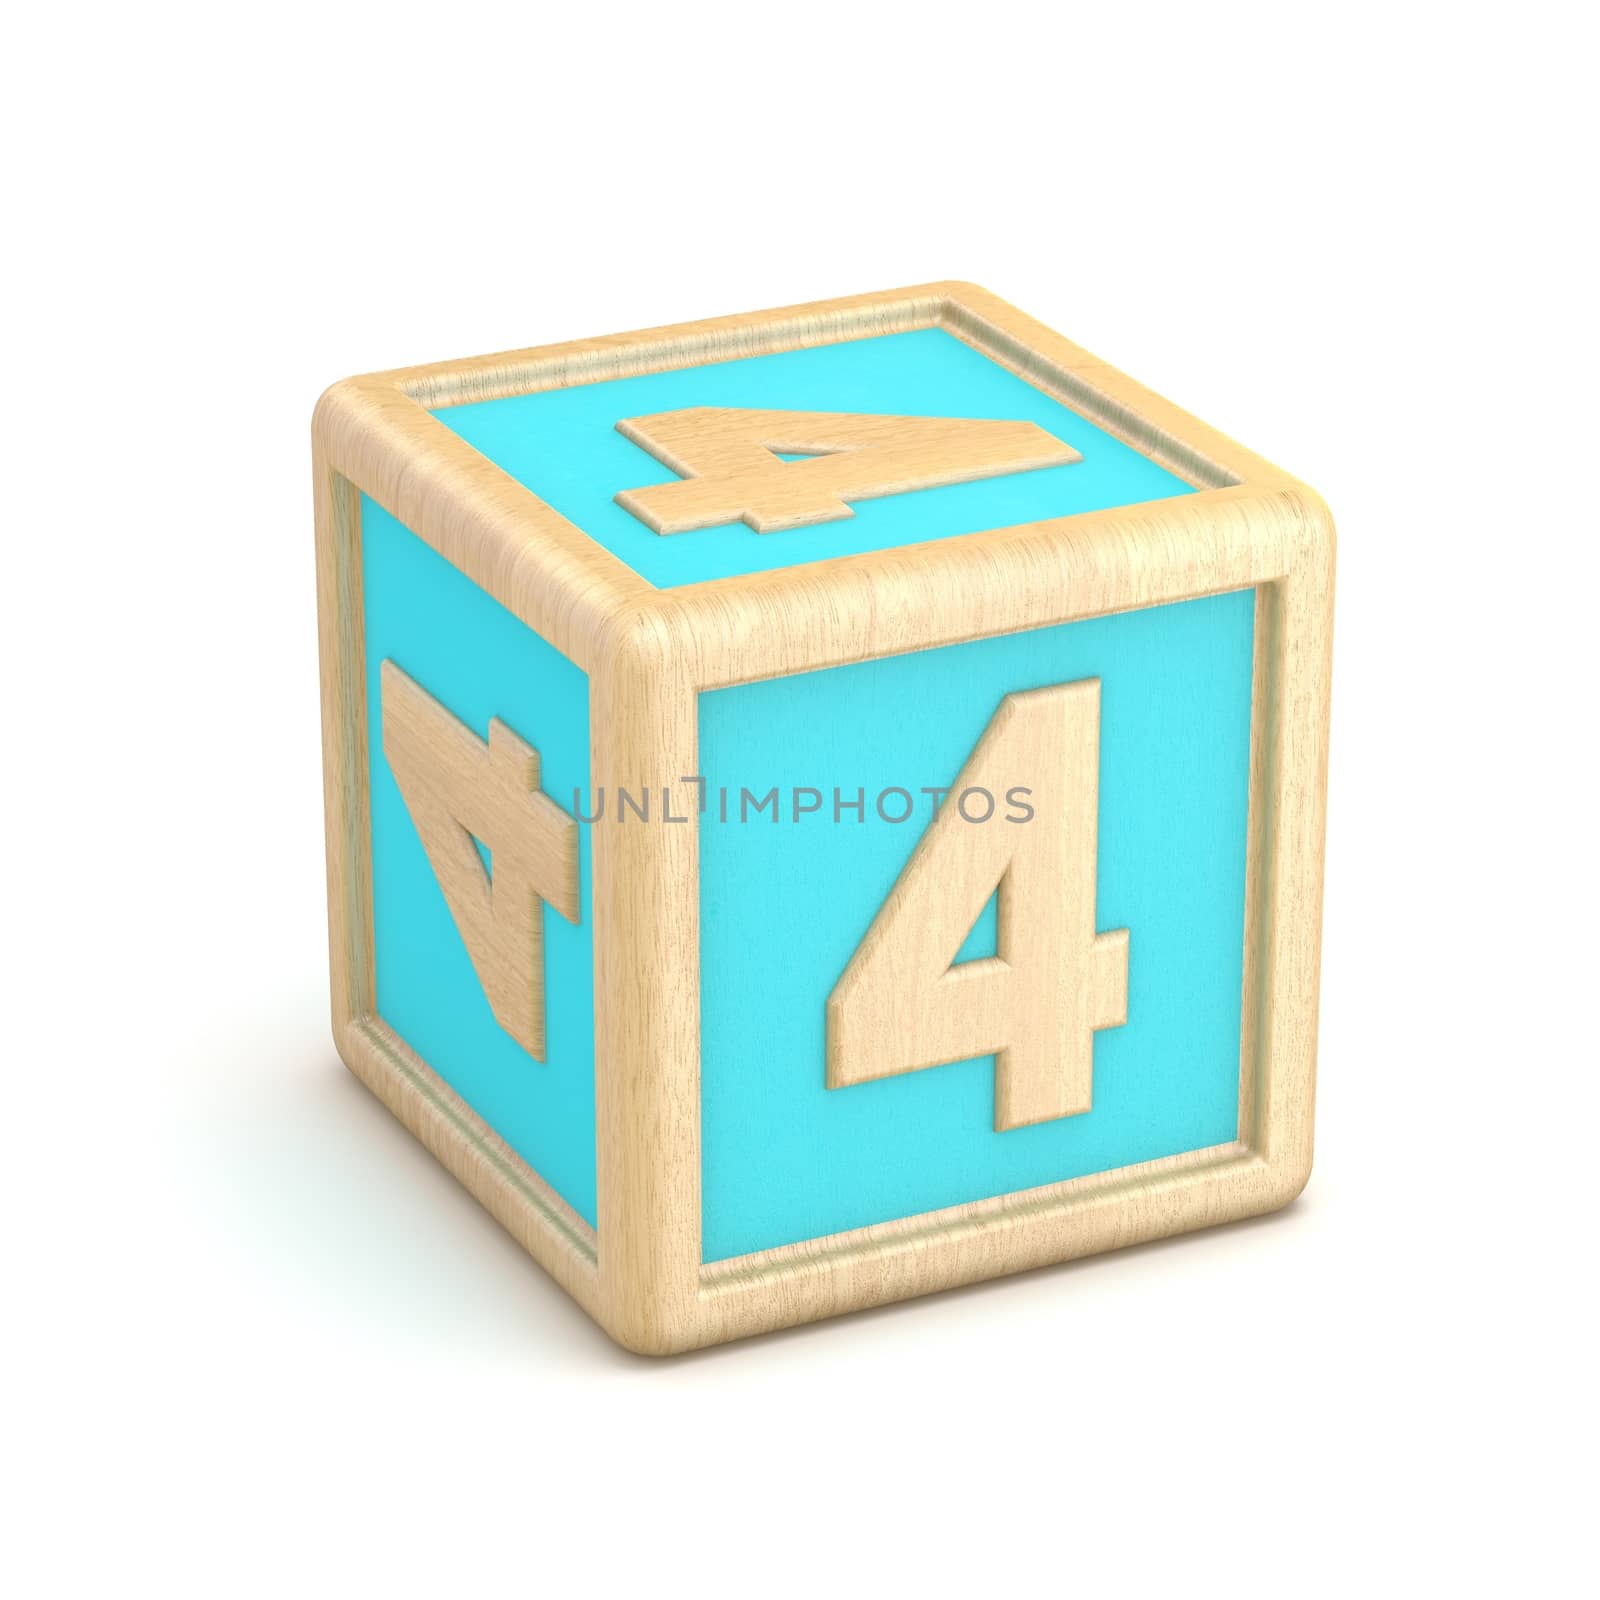 Number 4 FOUR wooden alphabet blocks font rotated. 3D render illustration isolated on white background